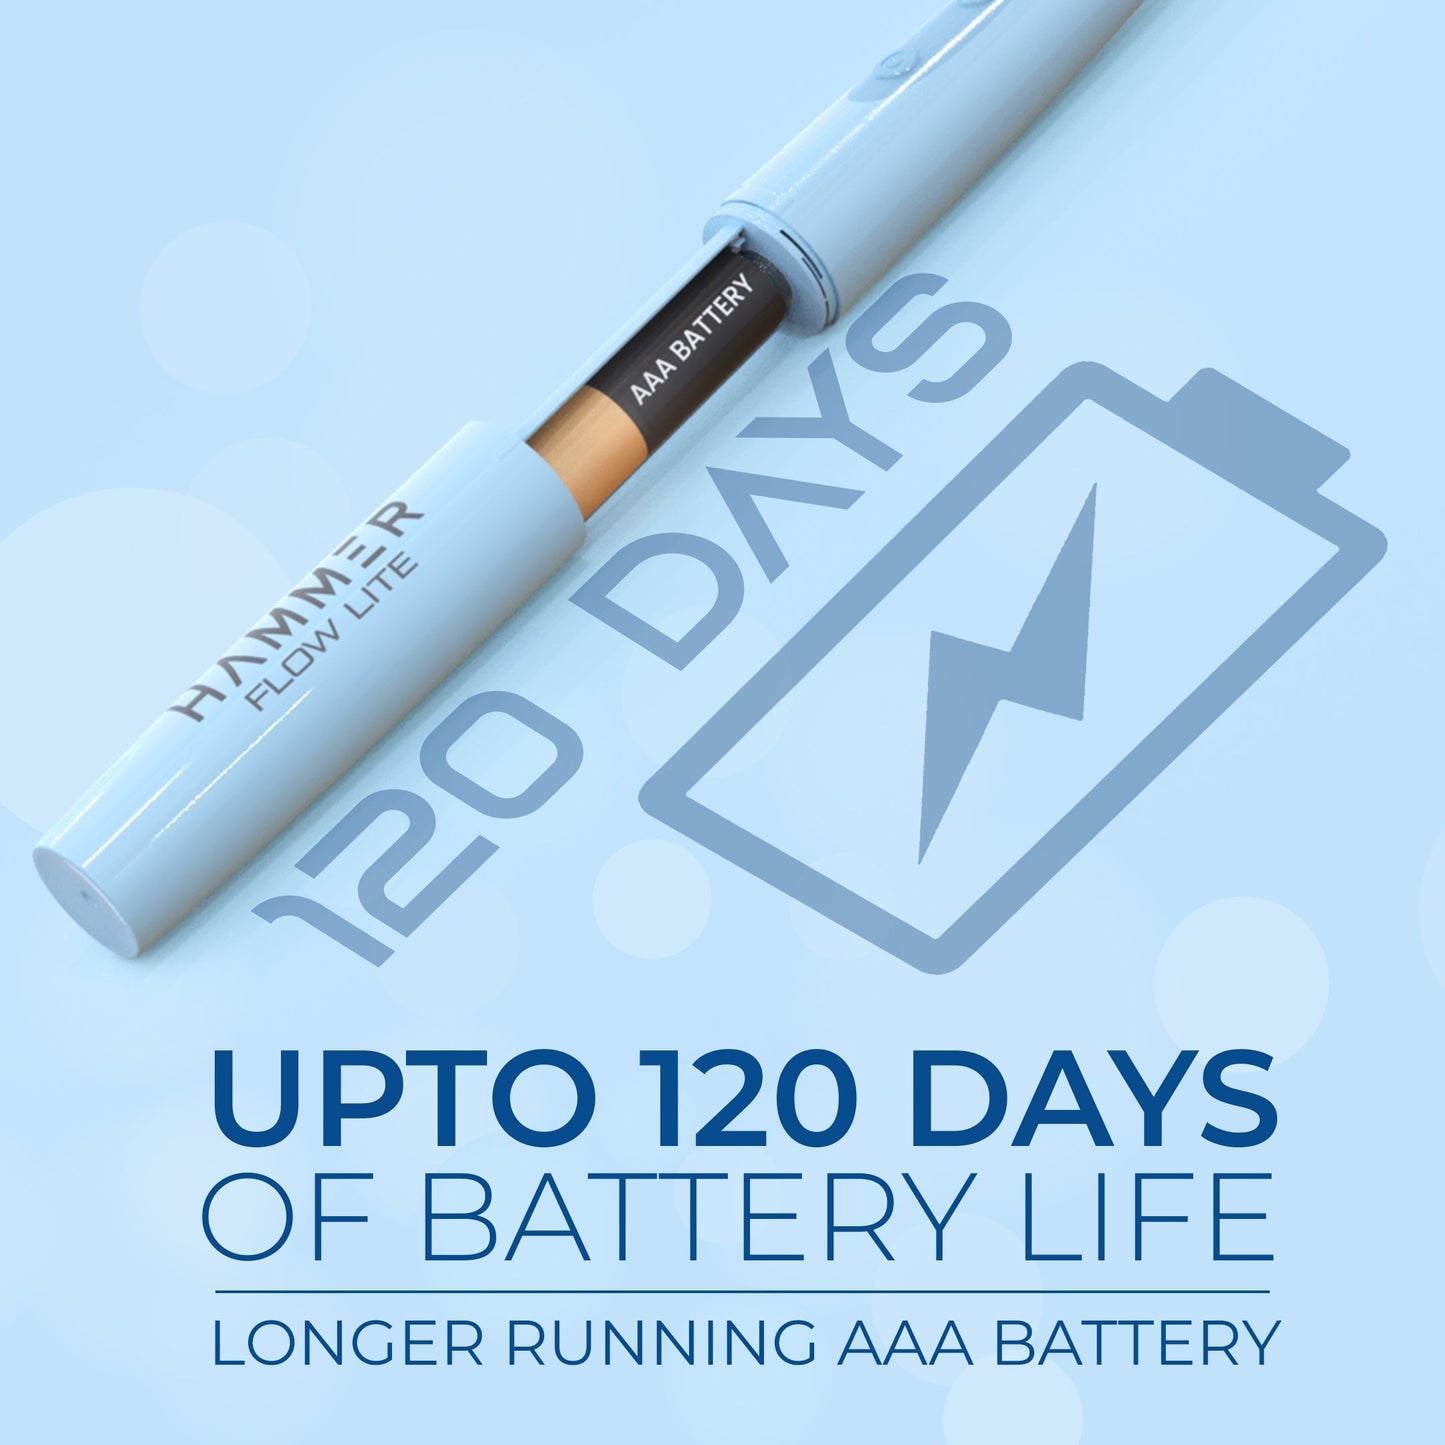 Hammer Flow Lite Electric Toothbrush with 120 Days Battery Backup